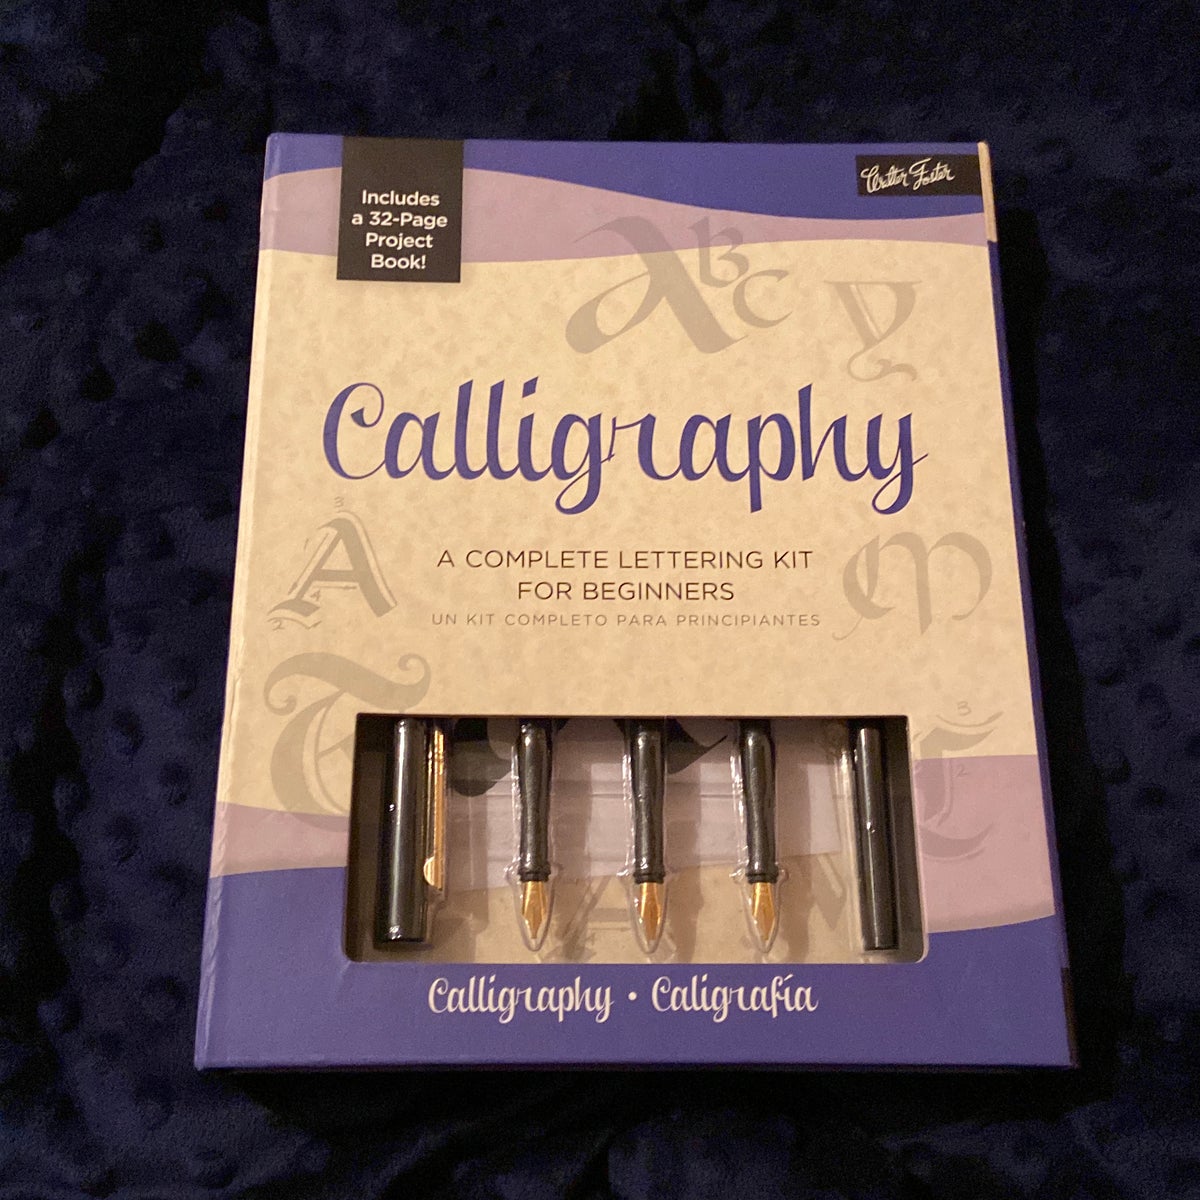 Calligraphy Kit: Learn the Art of book by Arthur Newhall